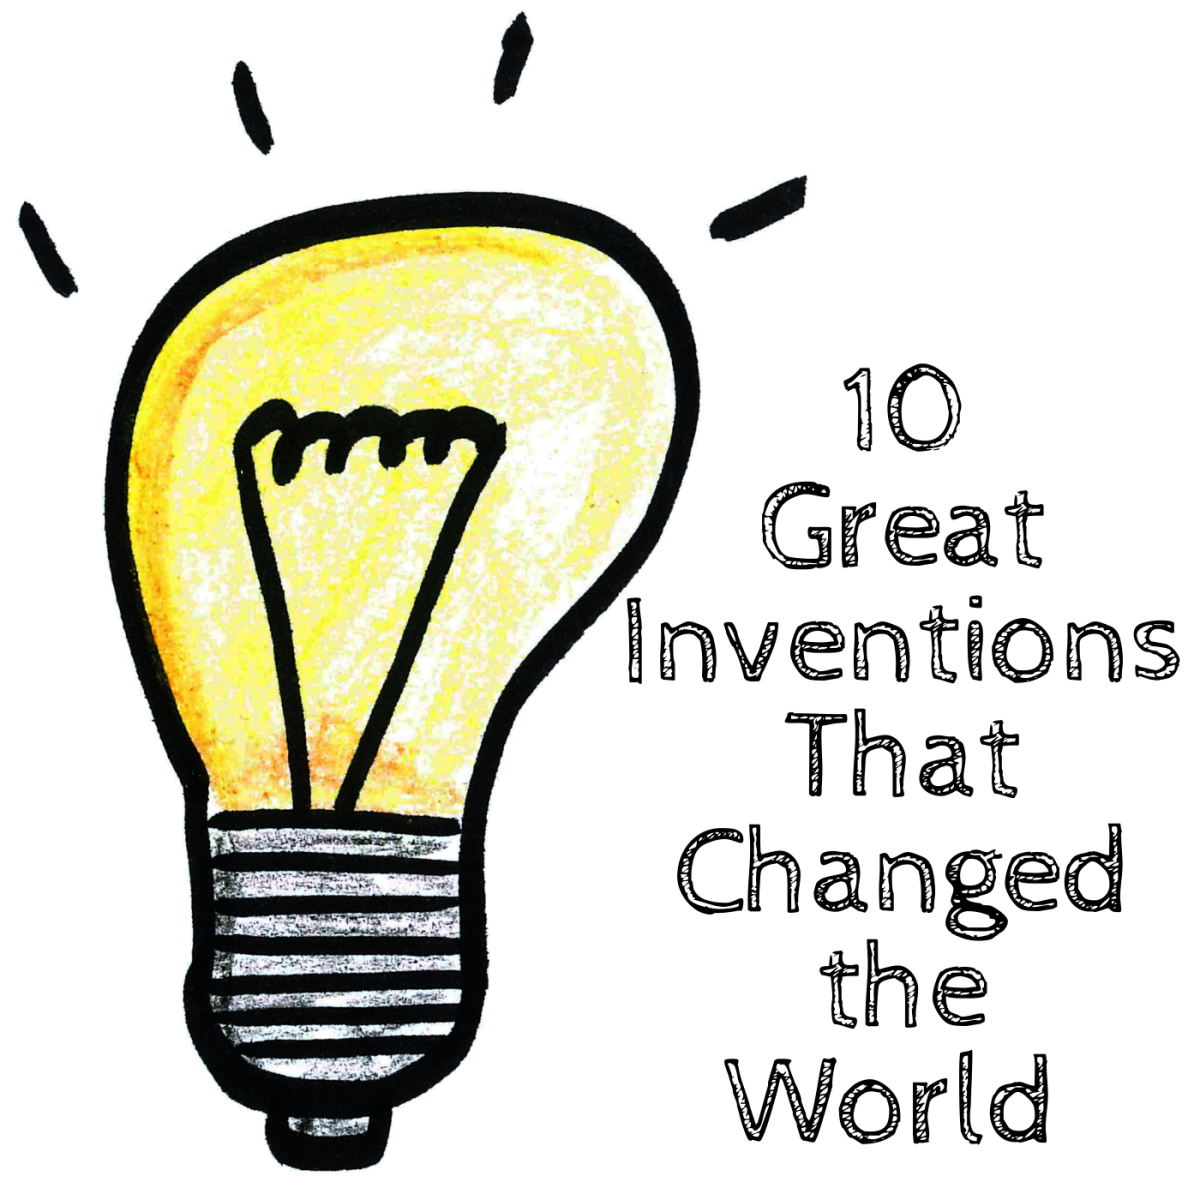 10 Great Inventions That Changed the World